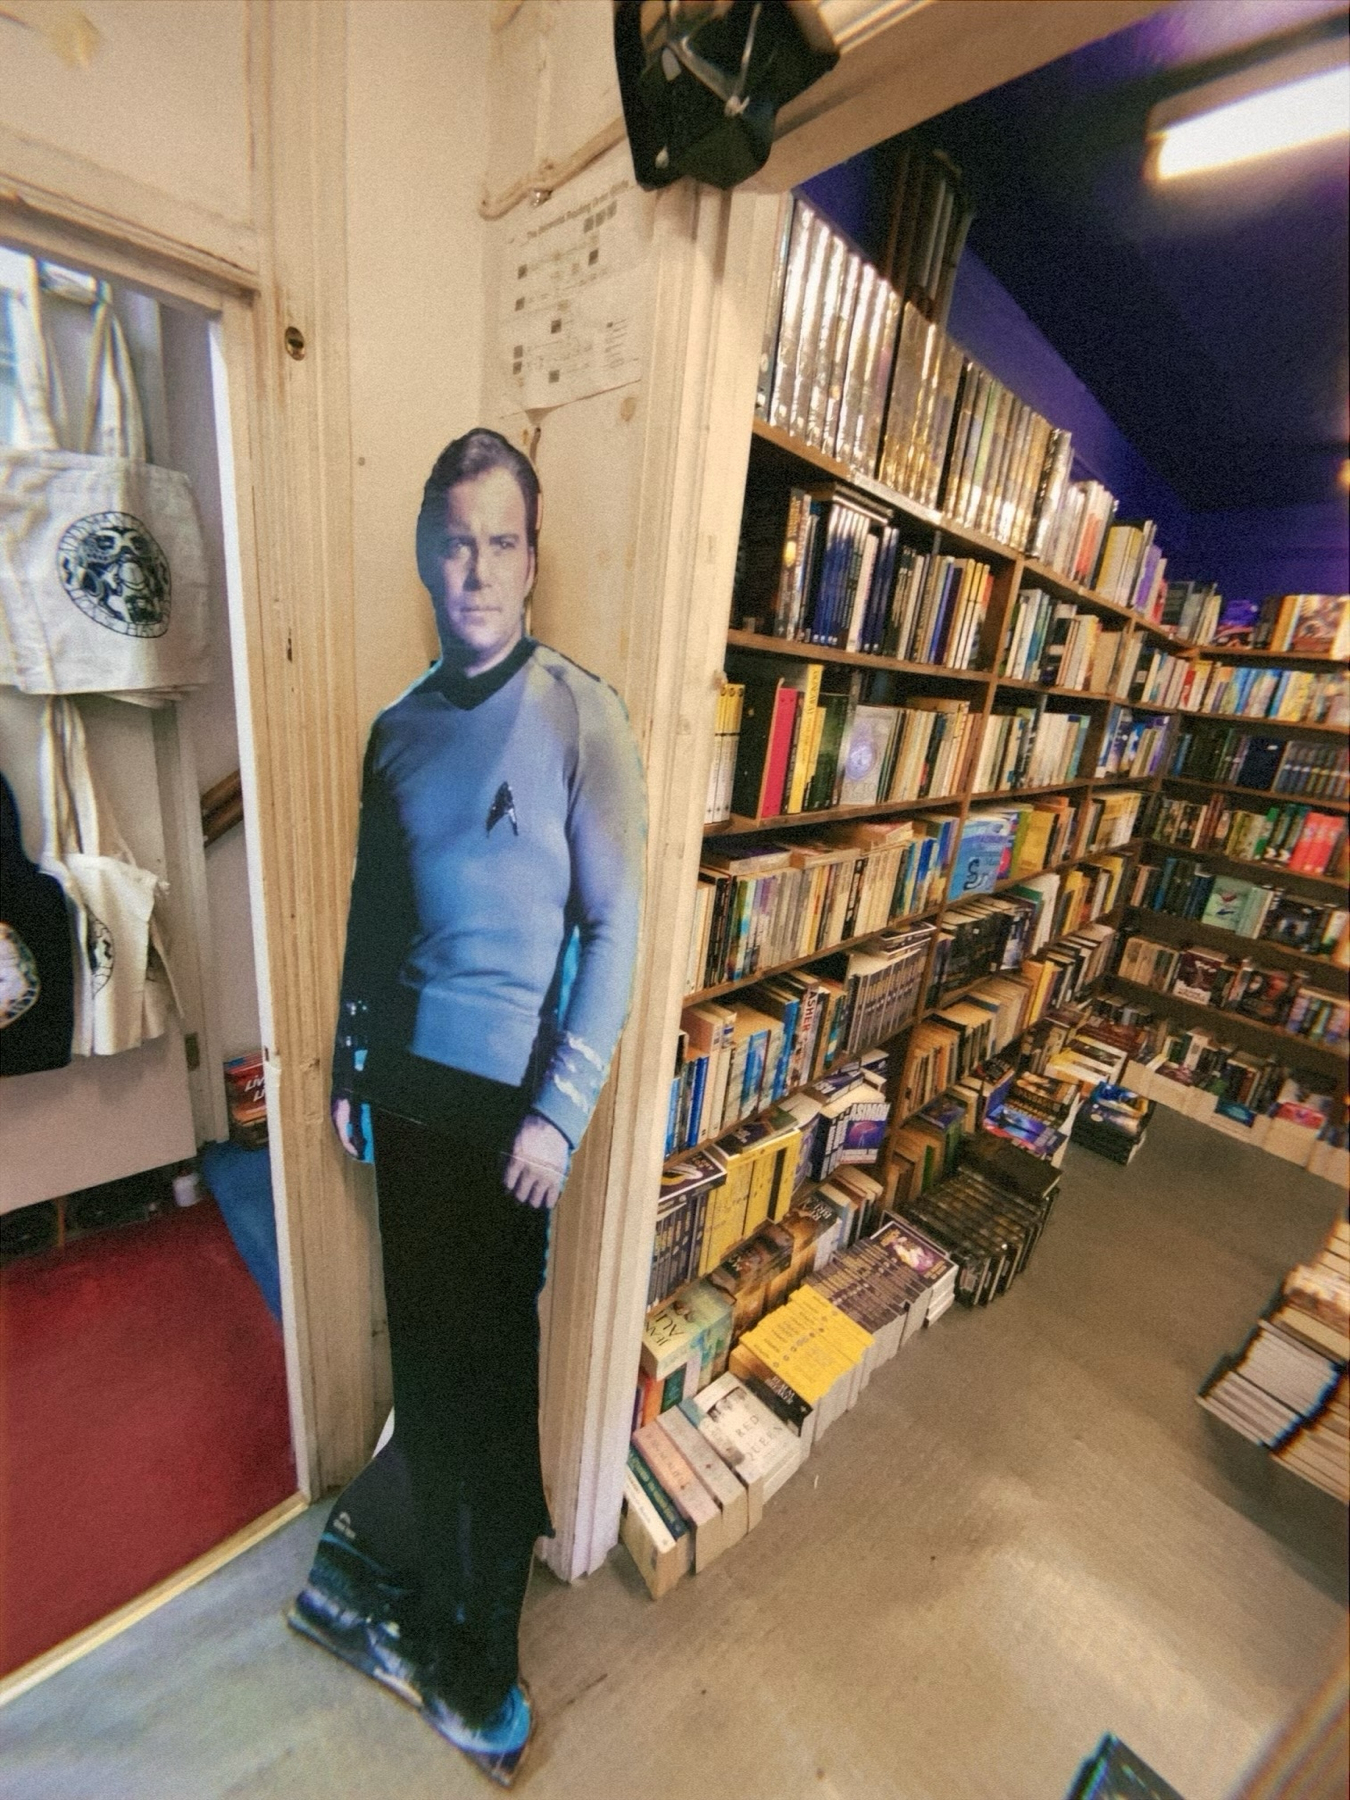 A life-size cardboard cutout of a Star Trek character stands at the entrance of a bookstore with rows of bookshelves filled with various books.